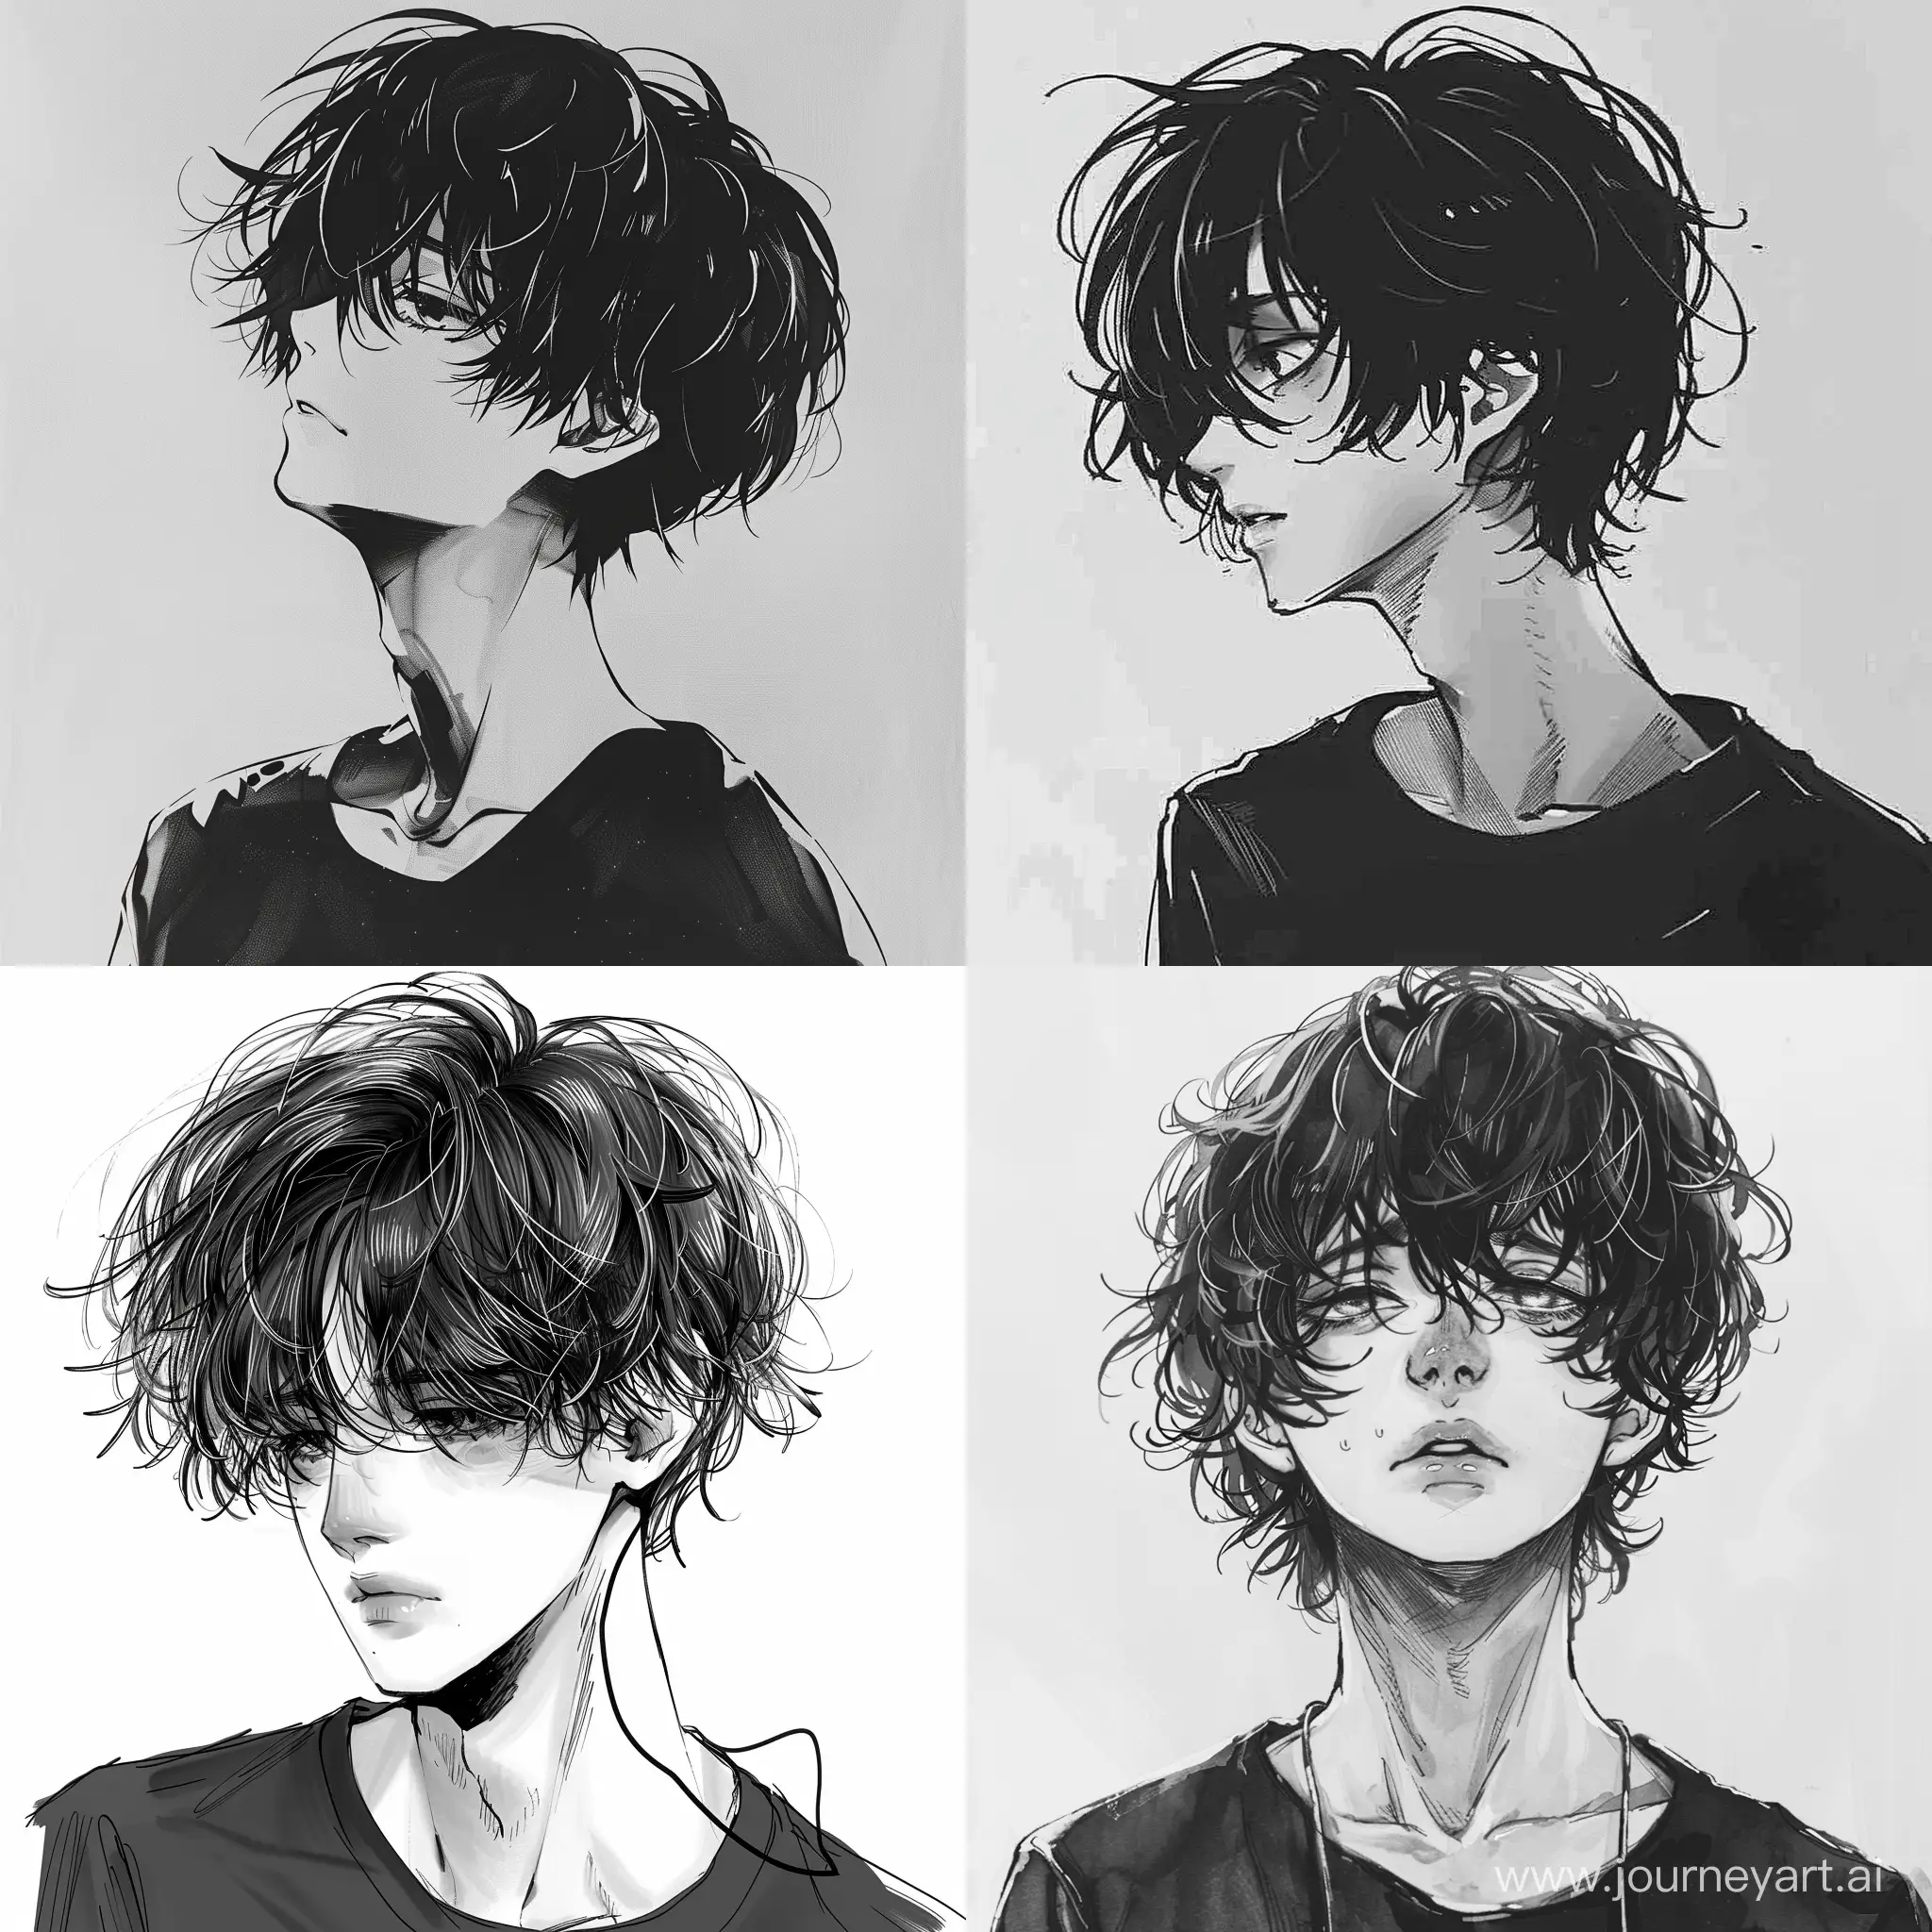 Ideal boy, with unstyled hair, thin, anime, 23 years old, oval head shape, only black and white colors